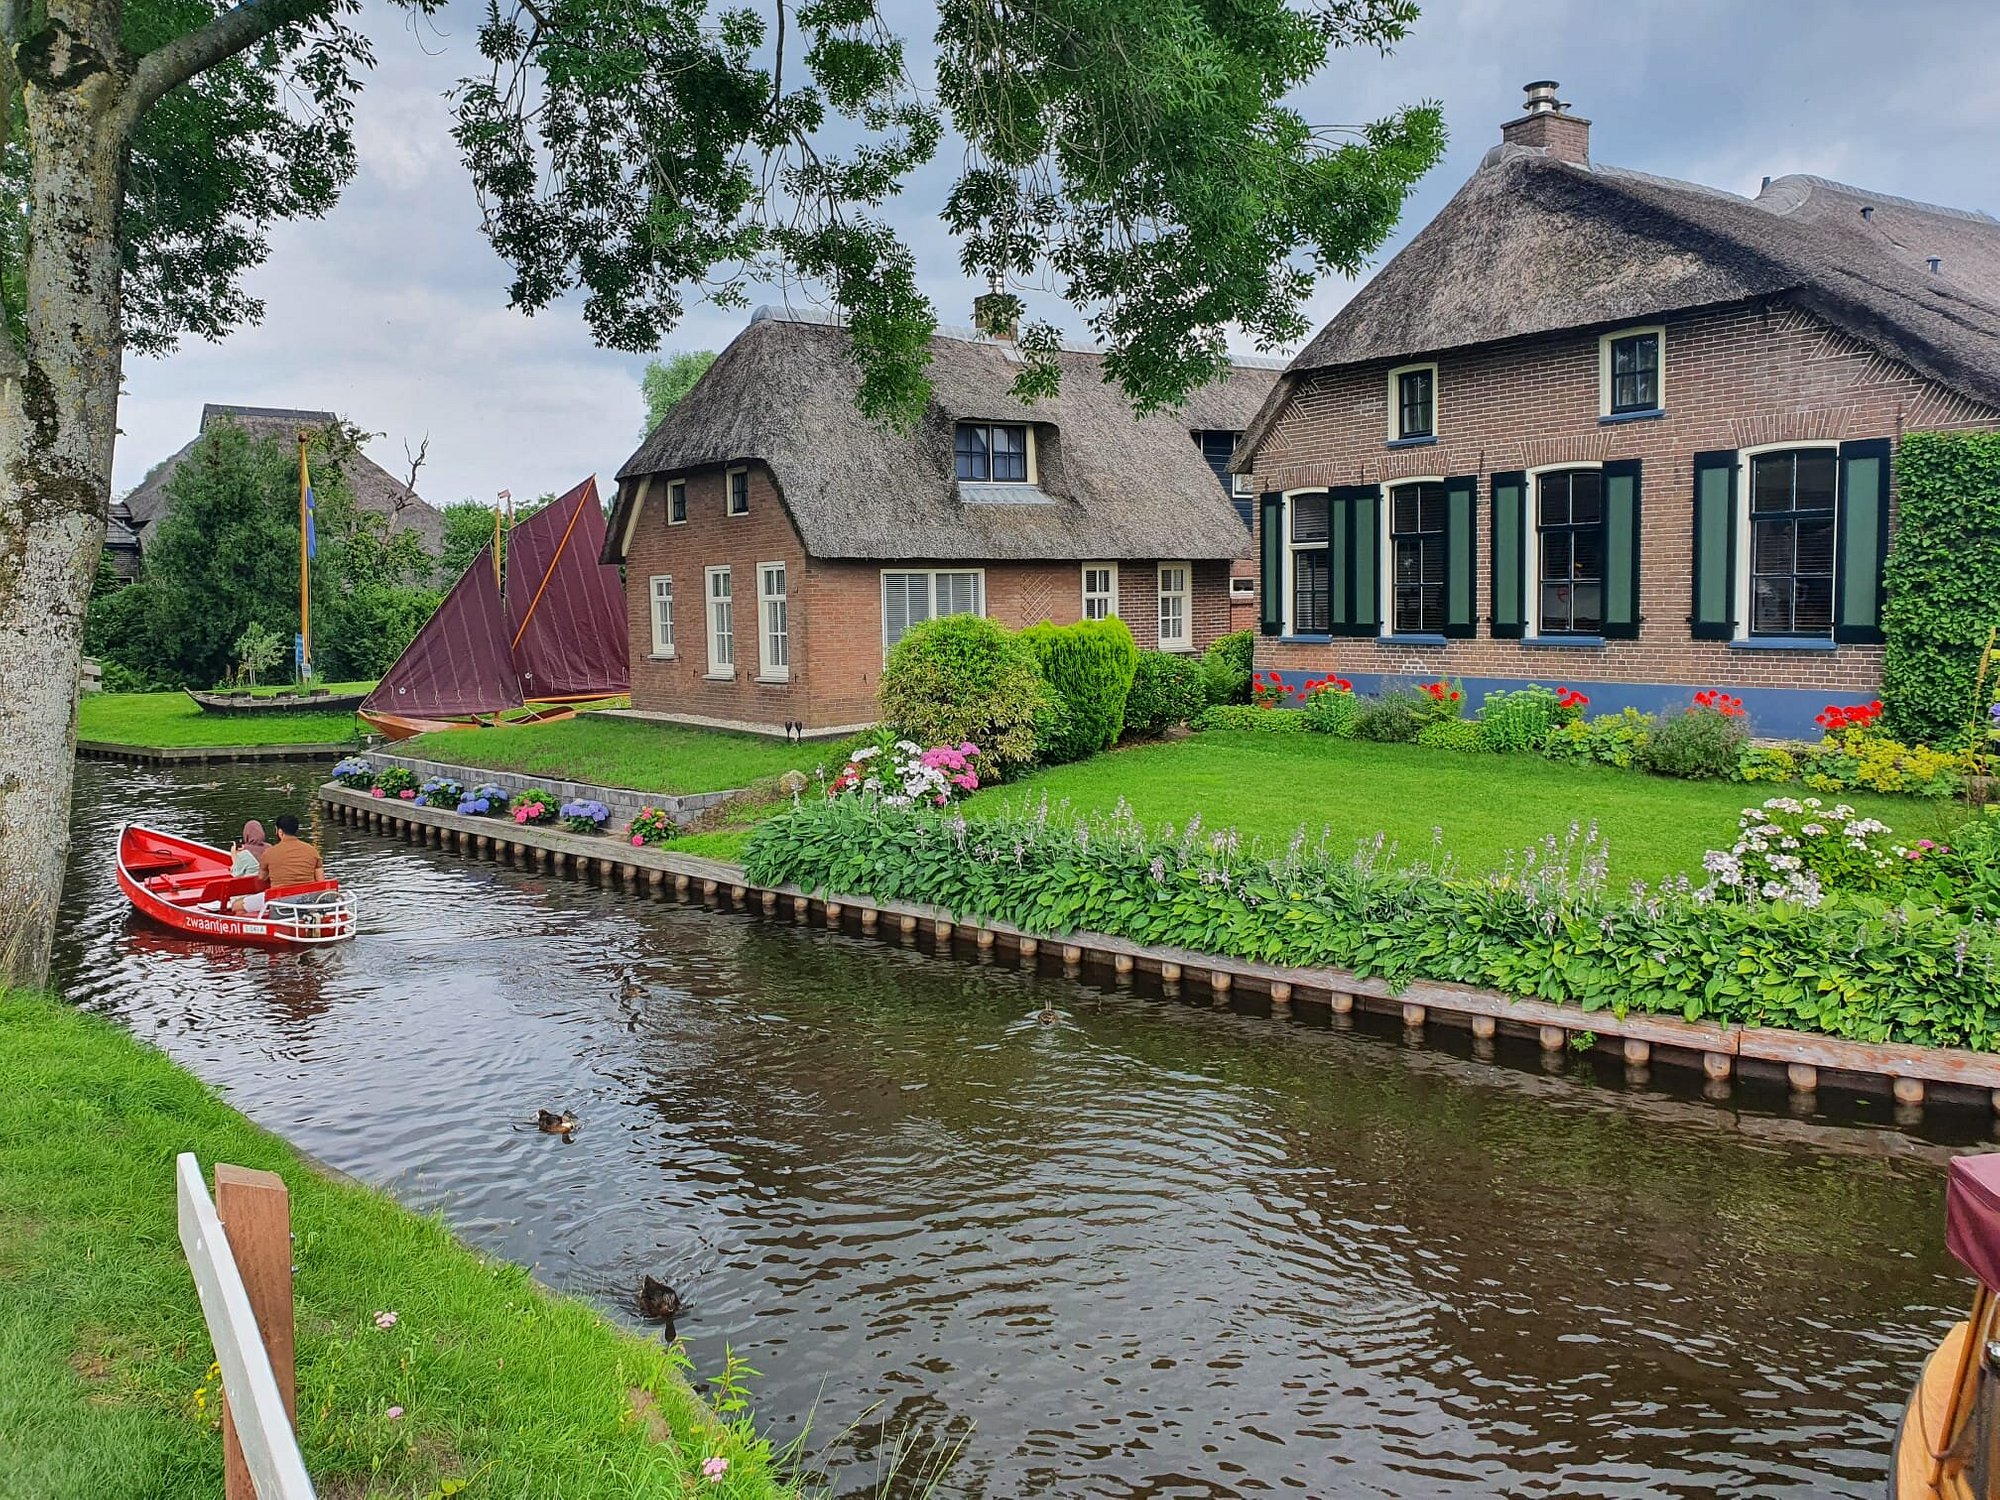 Boatrental-Giethoorn - All You Need to Know BEFORE You Go